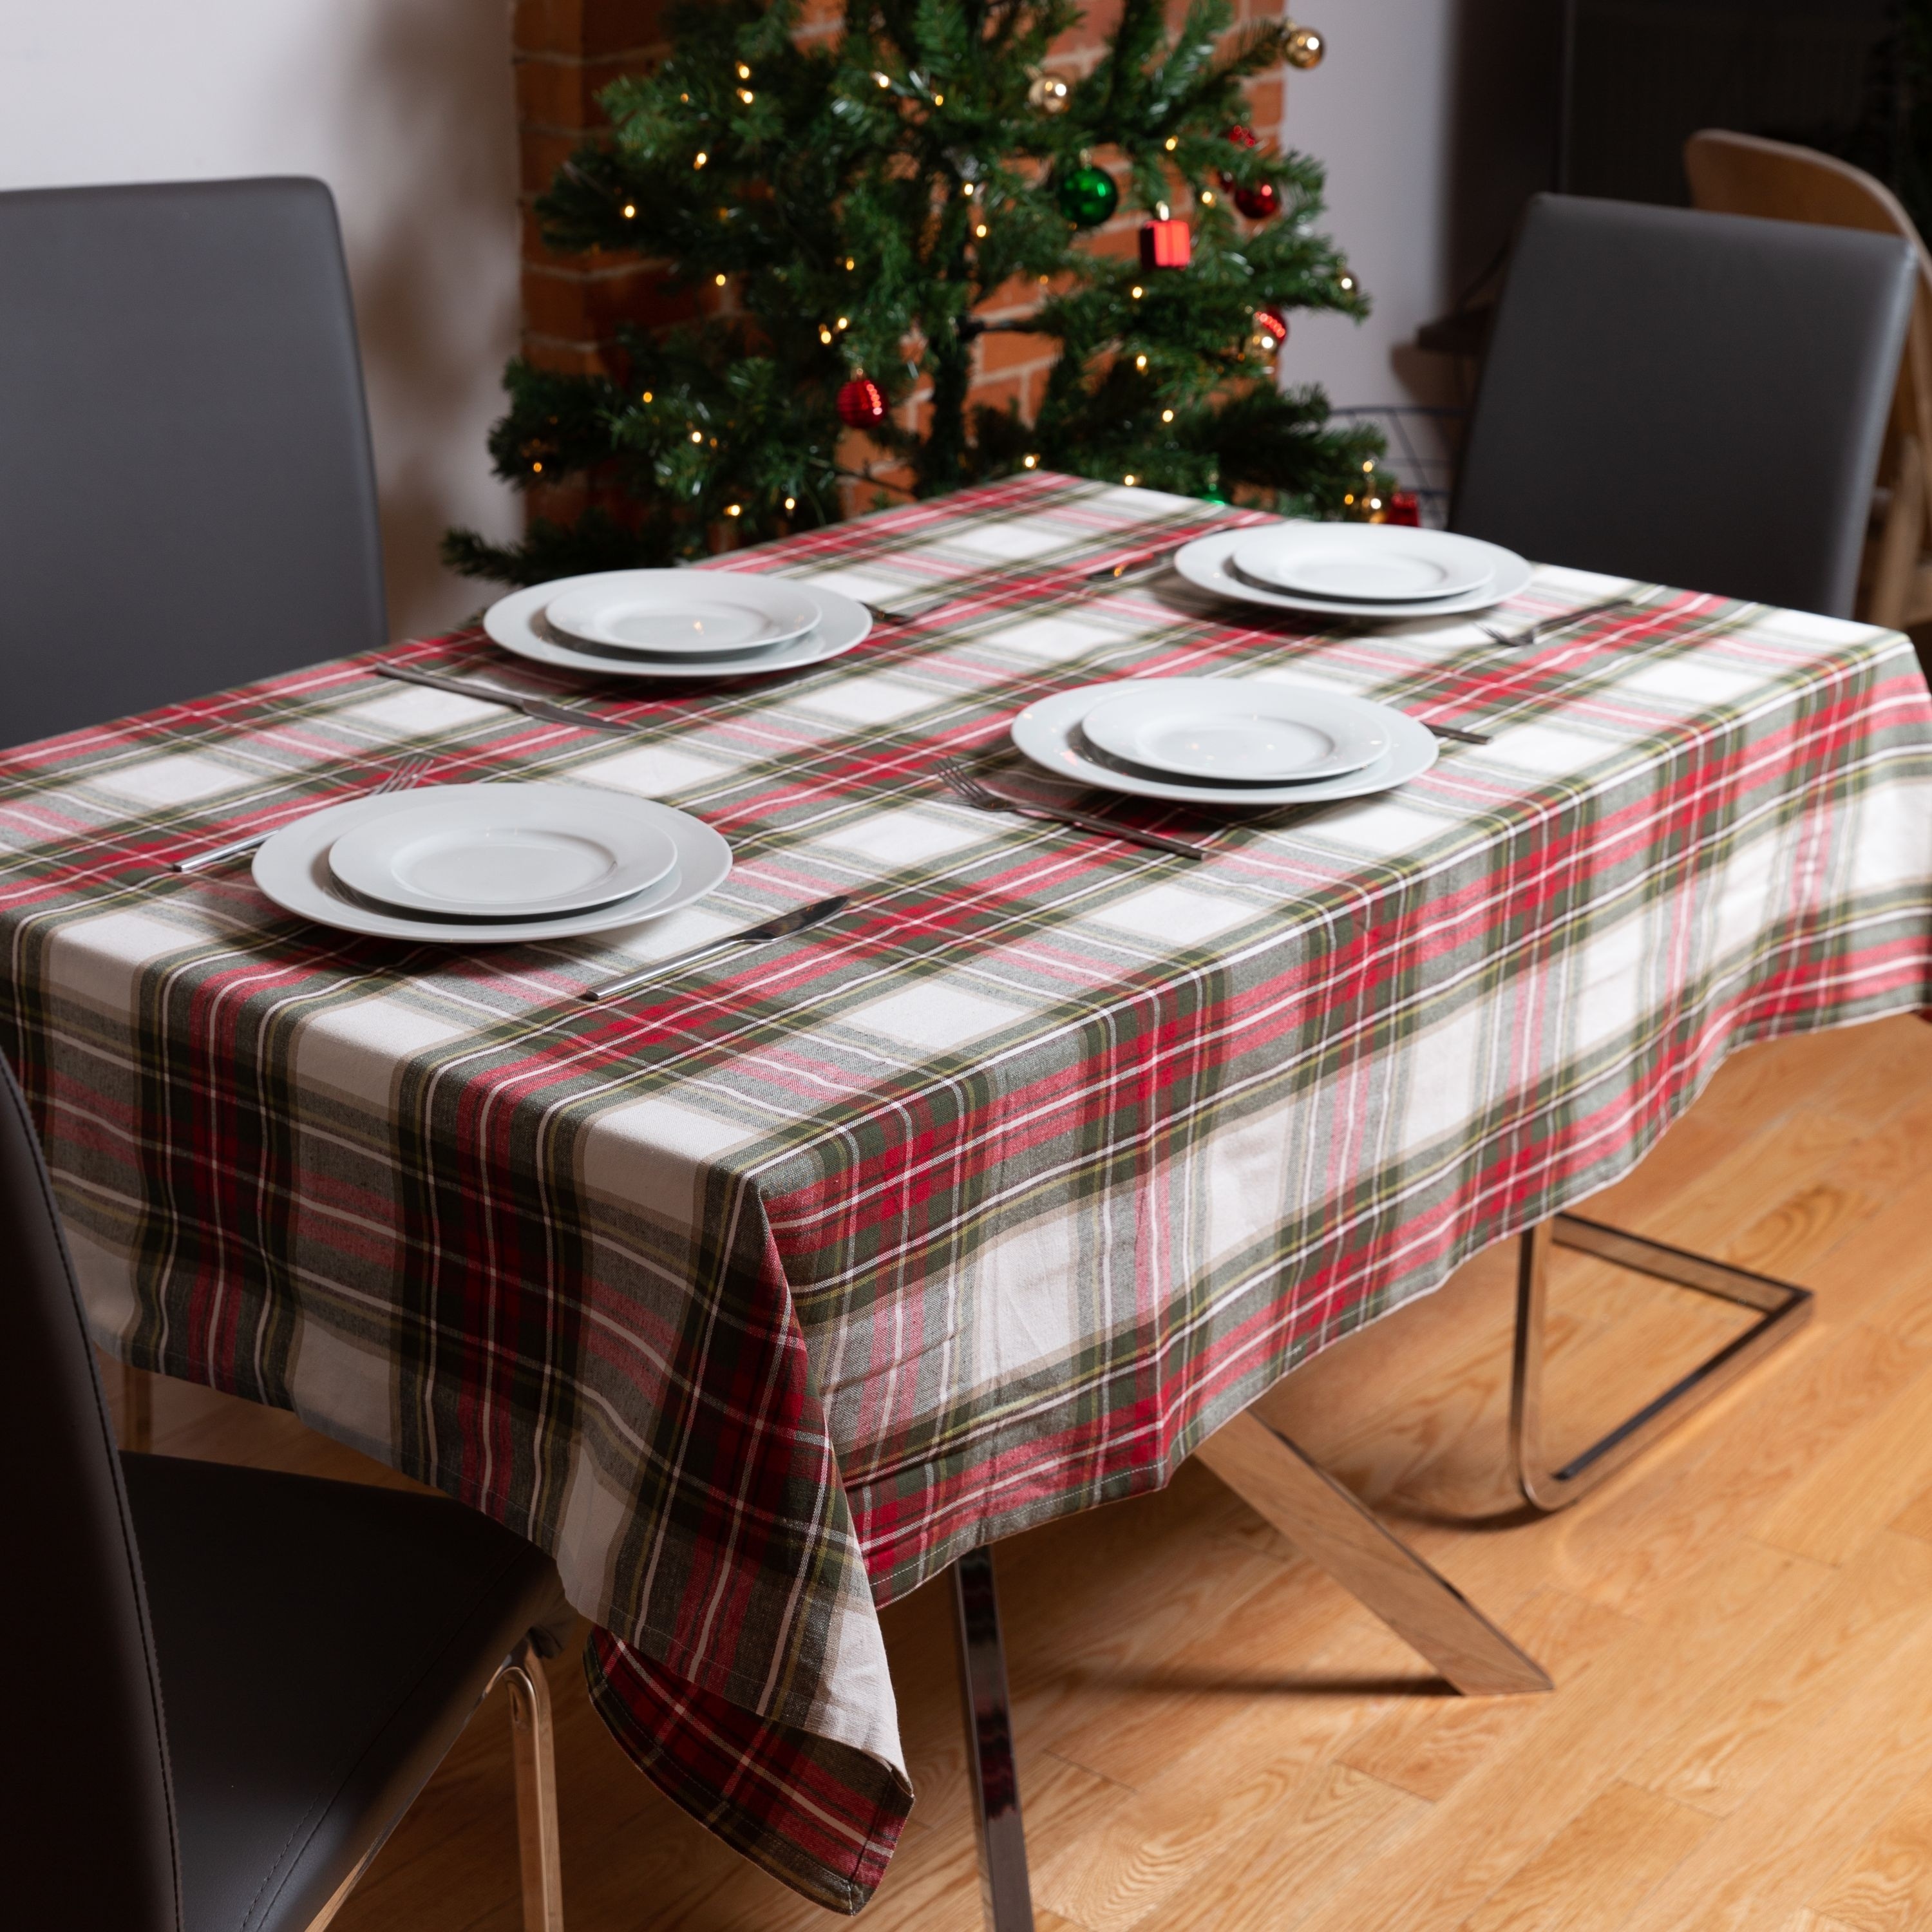 https://ak1.ostkcdn.com/images/products/is/images/direct/43b90a1a58ec698282aac200a3cf03c871ec34ab/Fabstyles-Celebration-Plaid-Christmas-High-Quality-Cotton-Tablecloth.jpg